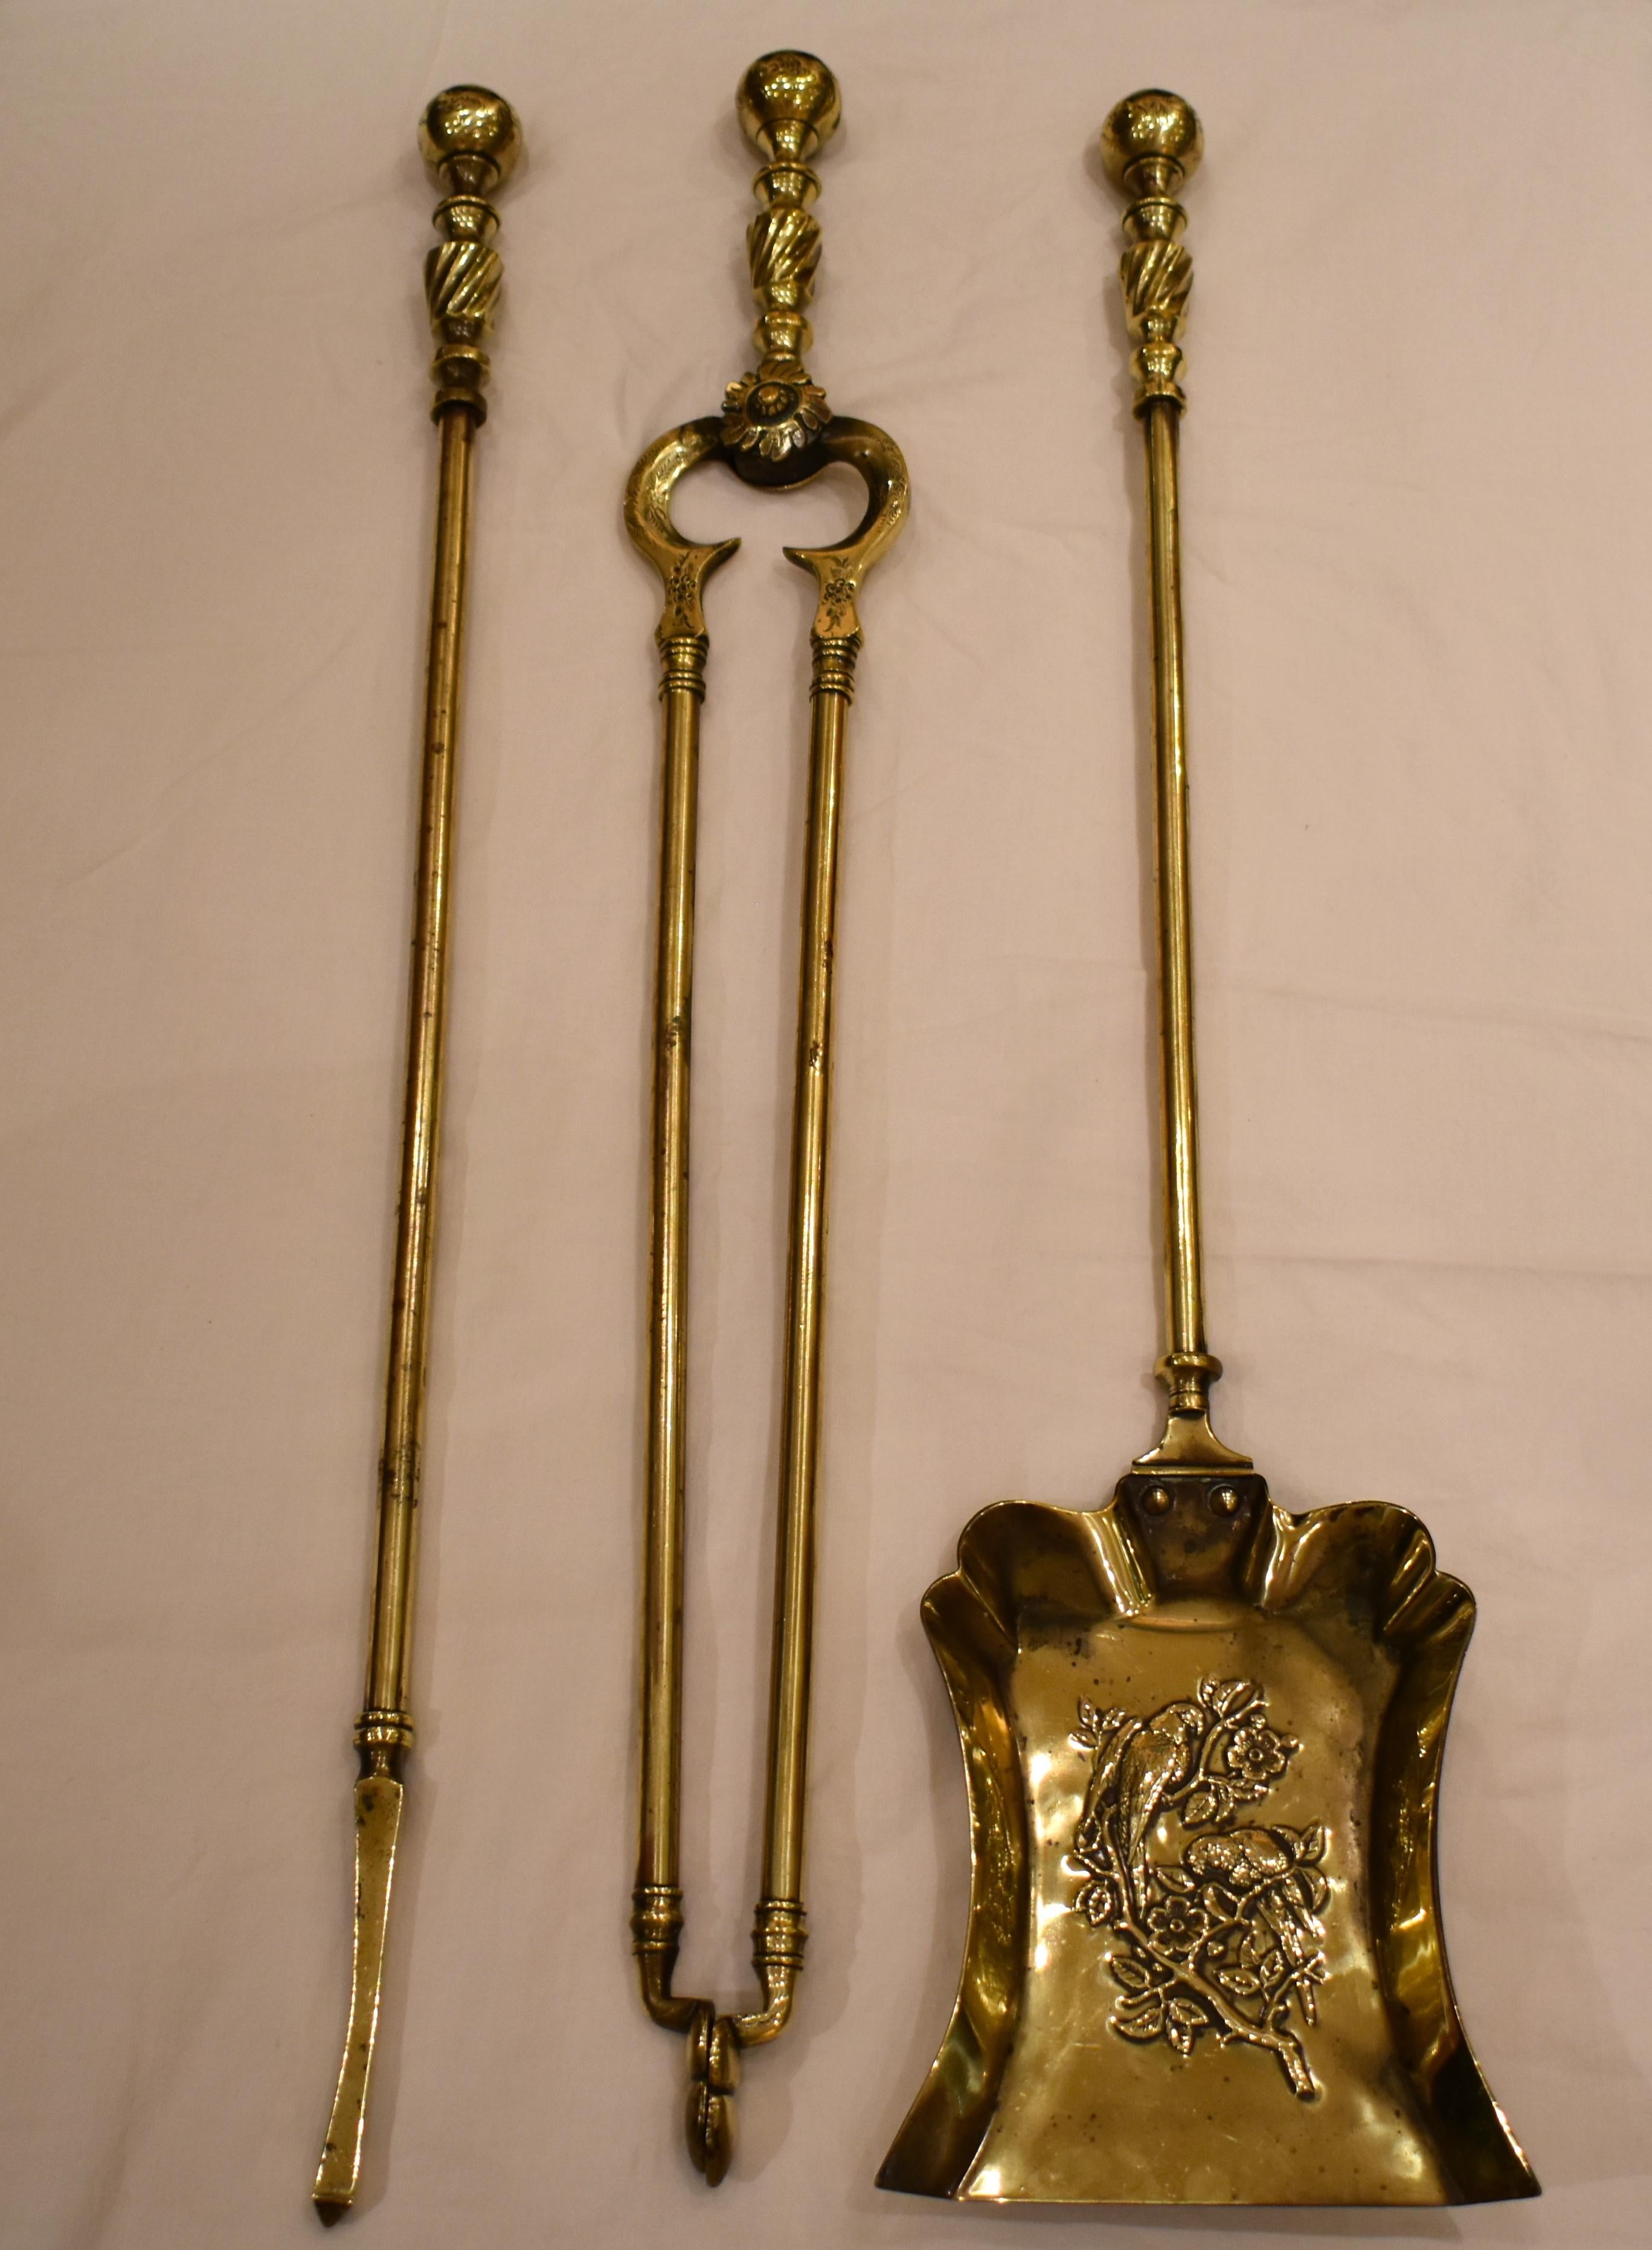 An extraordinary matching set of three mid-19th century English solid brass fire tools having suppressed ball finials with floral pattern vectors. The shovel entails a unique illustration of a pair of exotic birds on a branch, with all three pieces